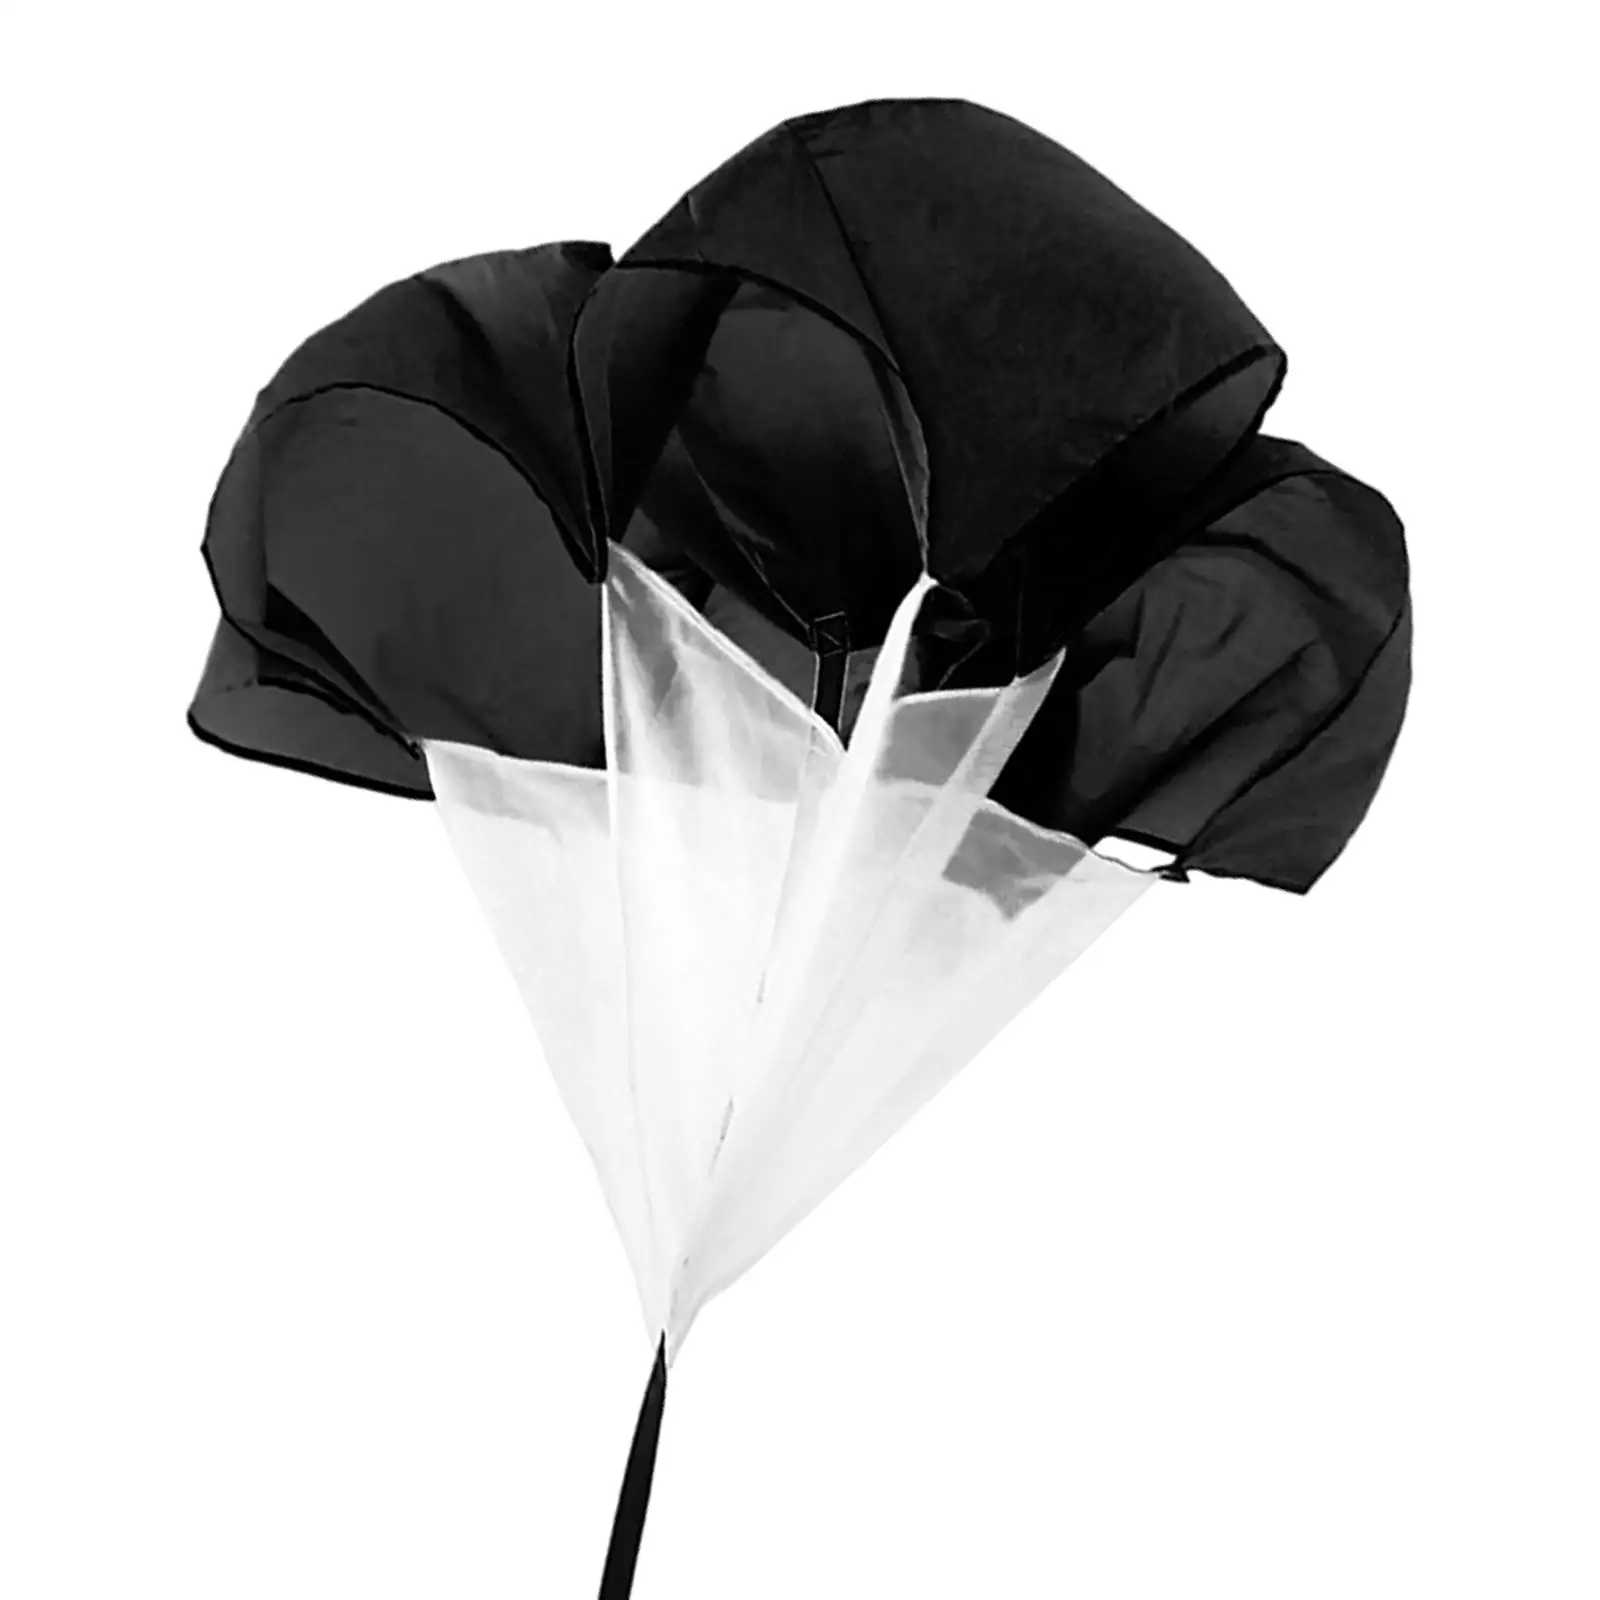 Speed Training Resistance Parachute Running Physical Umbrella for Football Drilling Sport